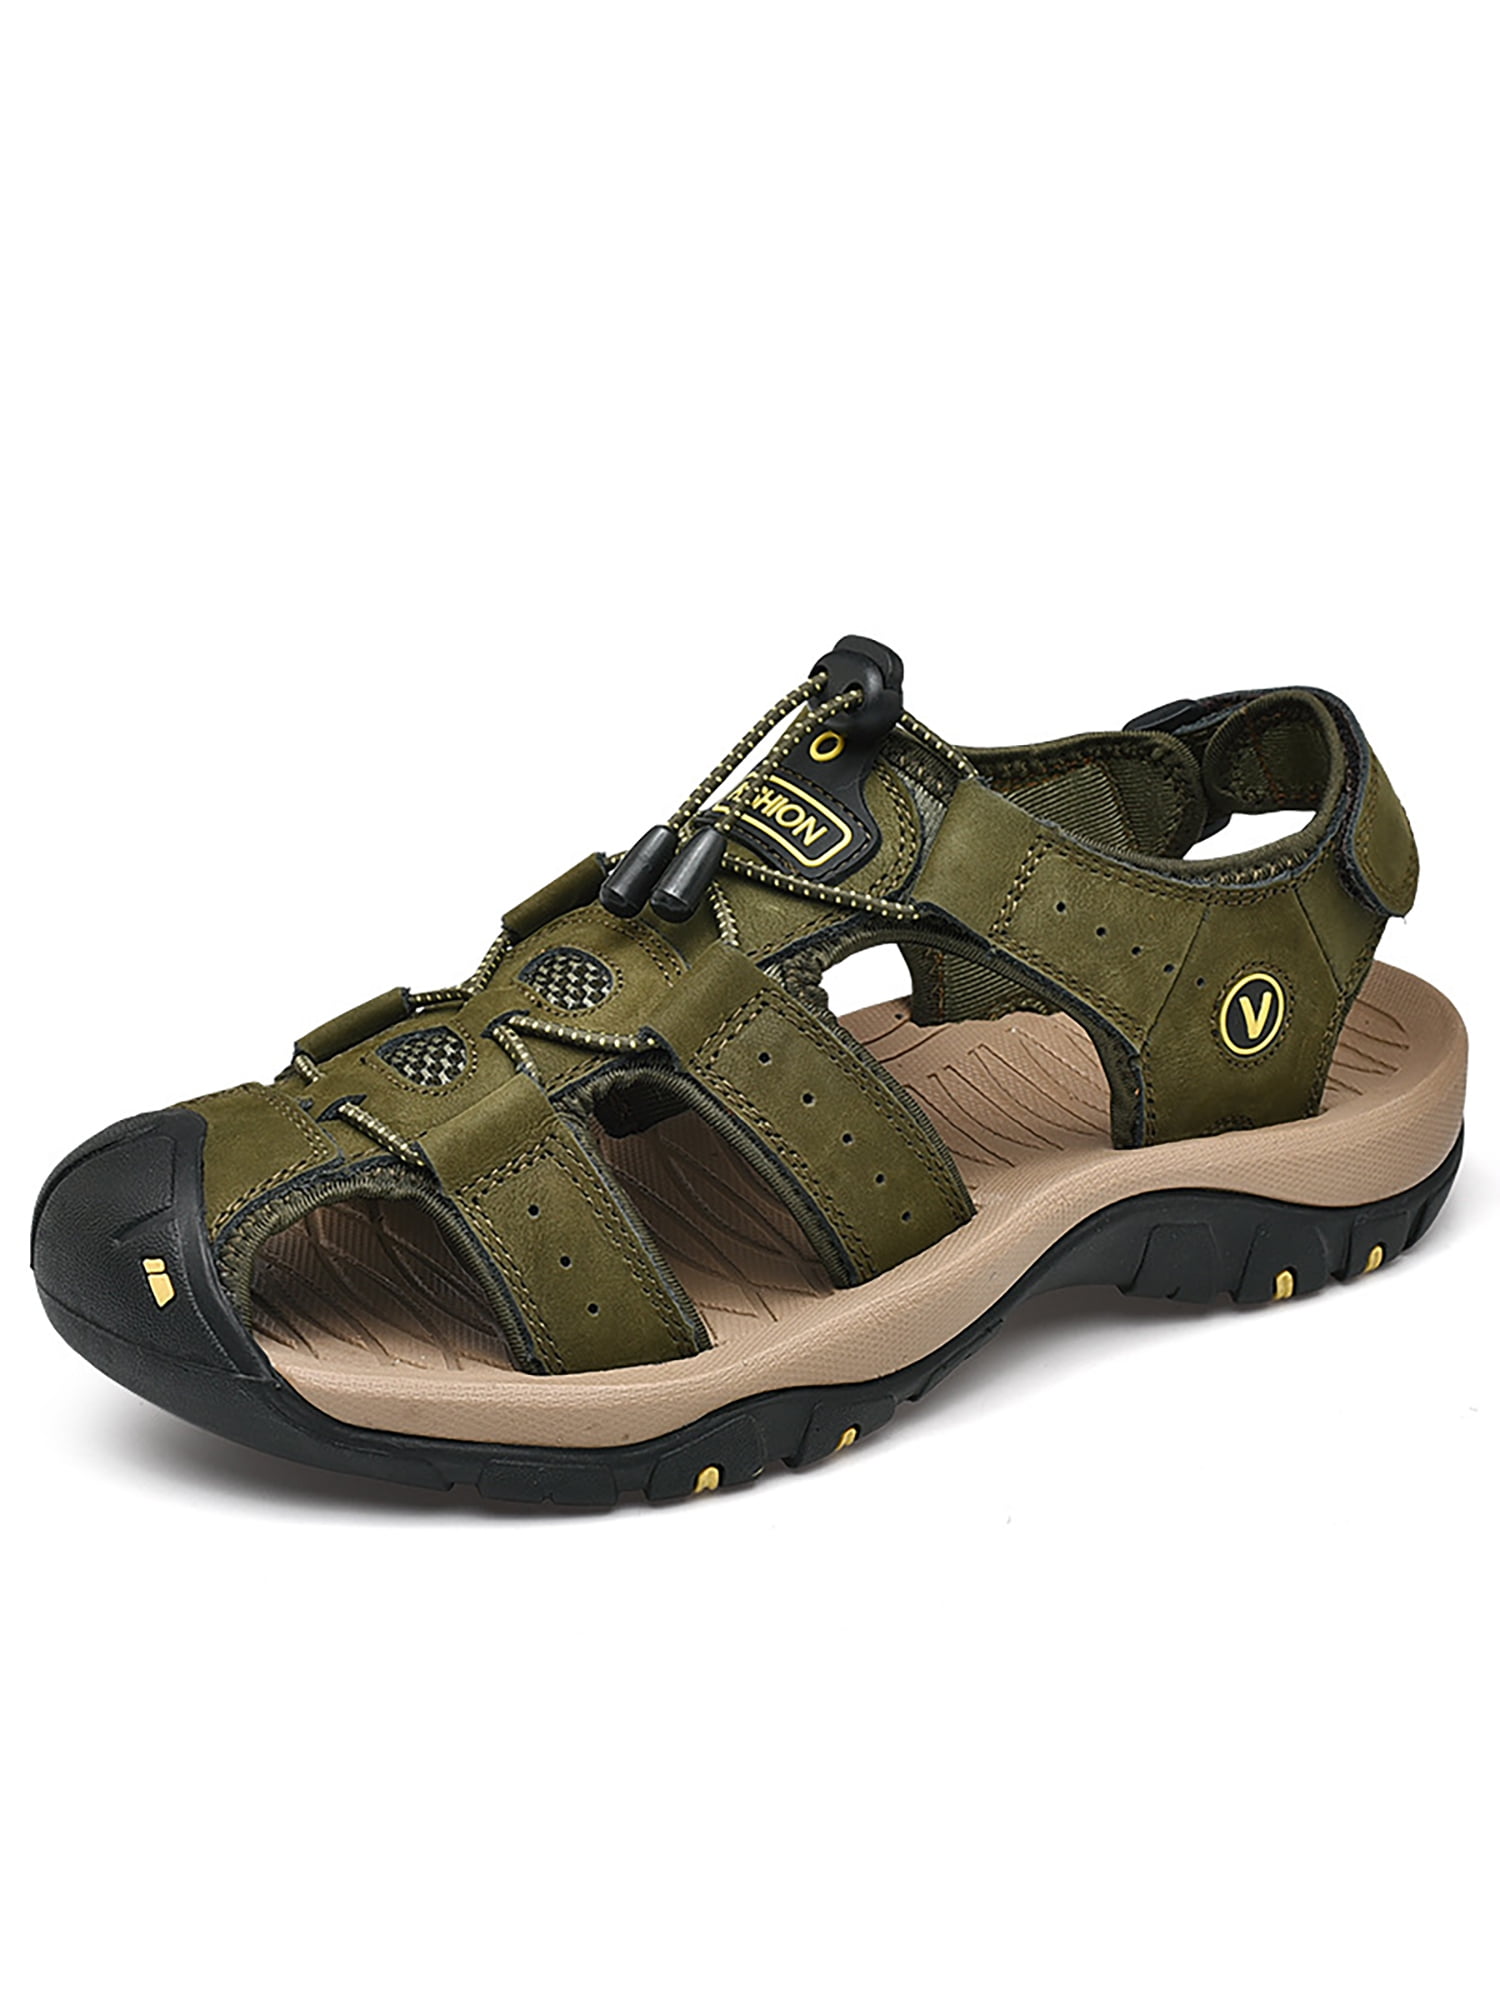 Walking Suede Sandals Outdoor Sports for Mens Summer Fisherman Buckle Breathable Water Shoes